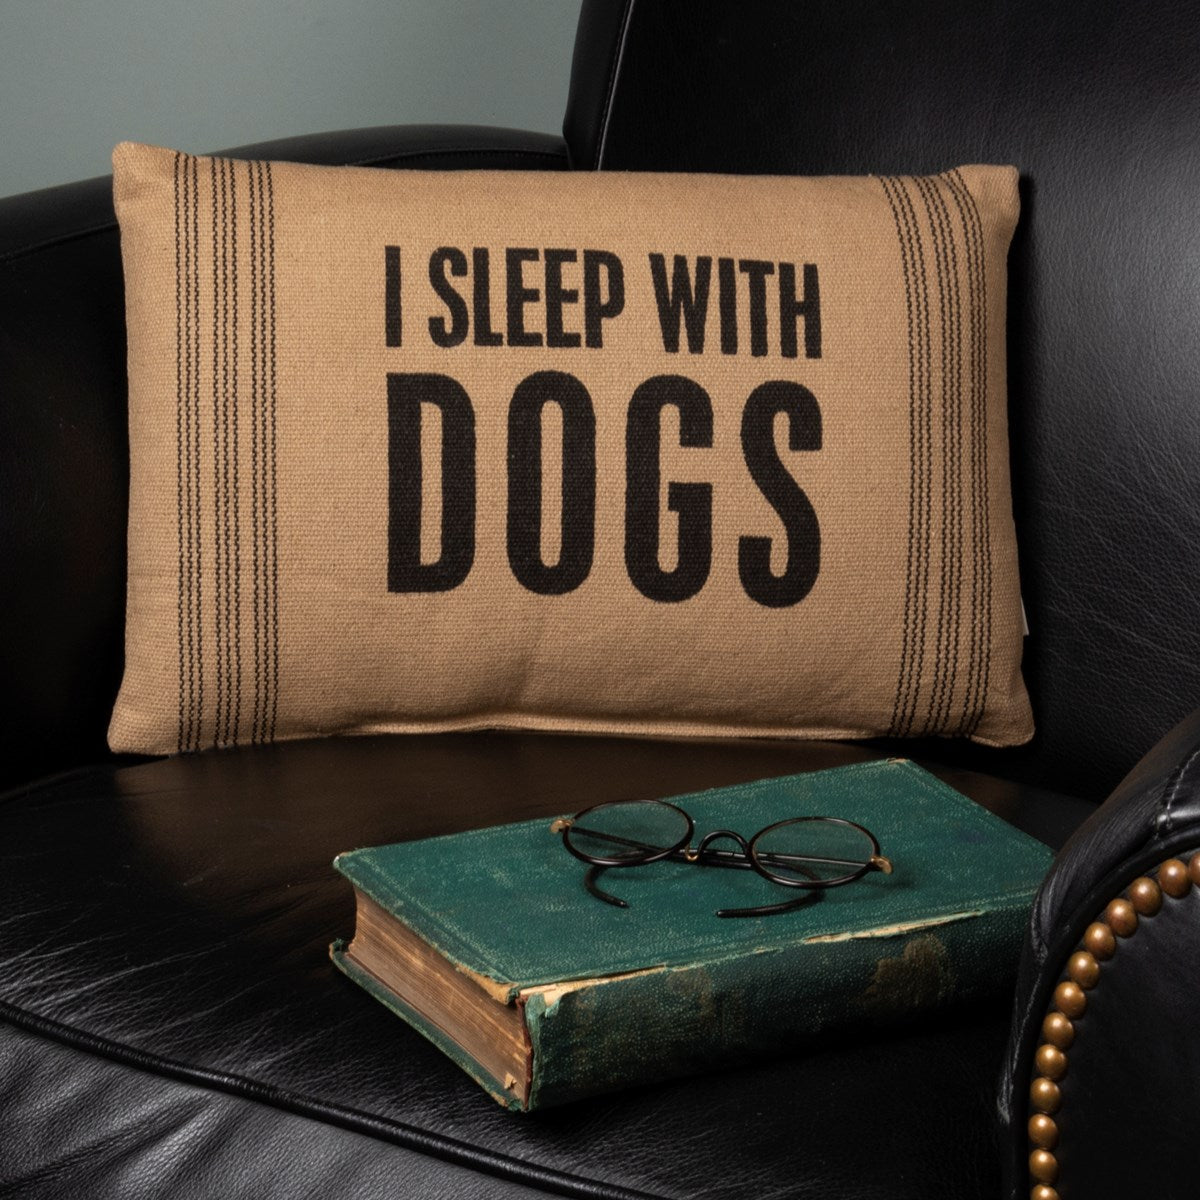 Pillow - "I Sleep With Dogs"